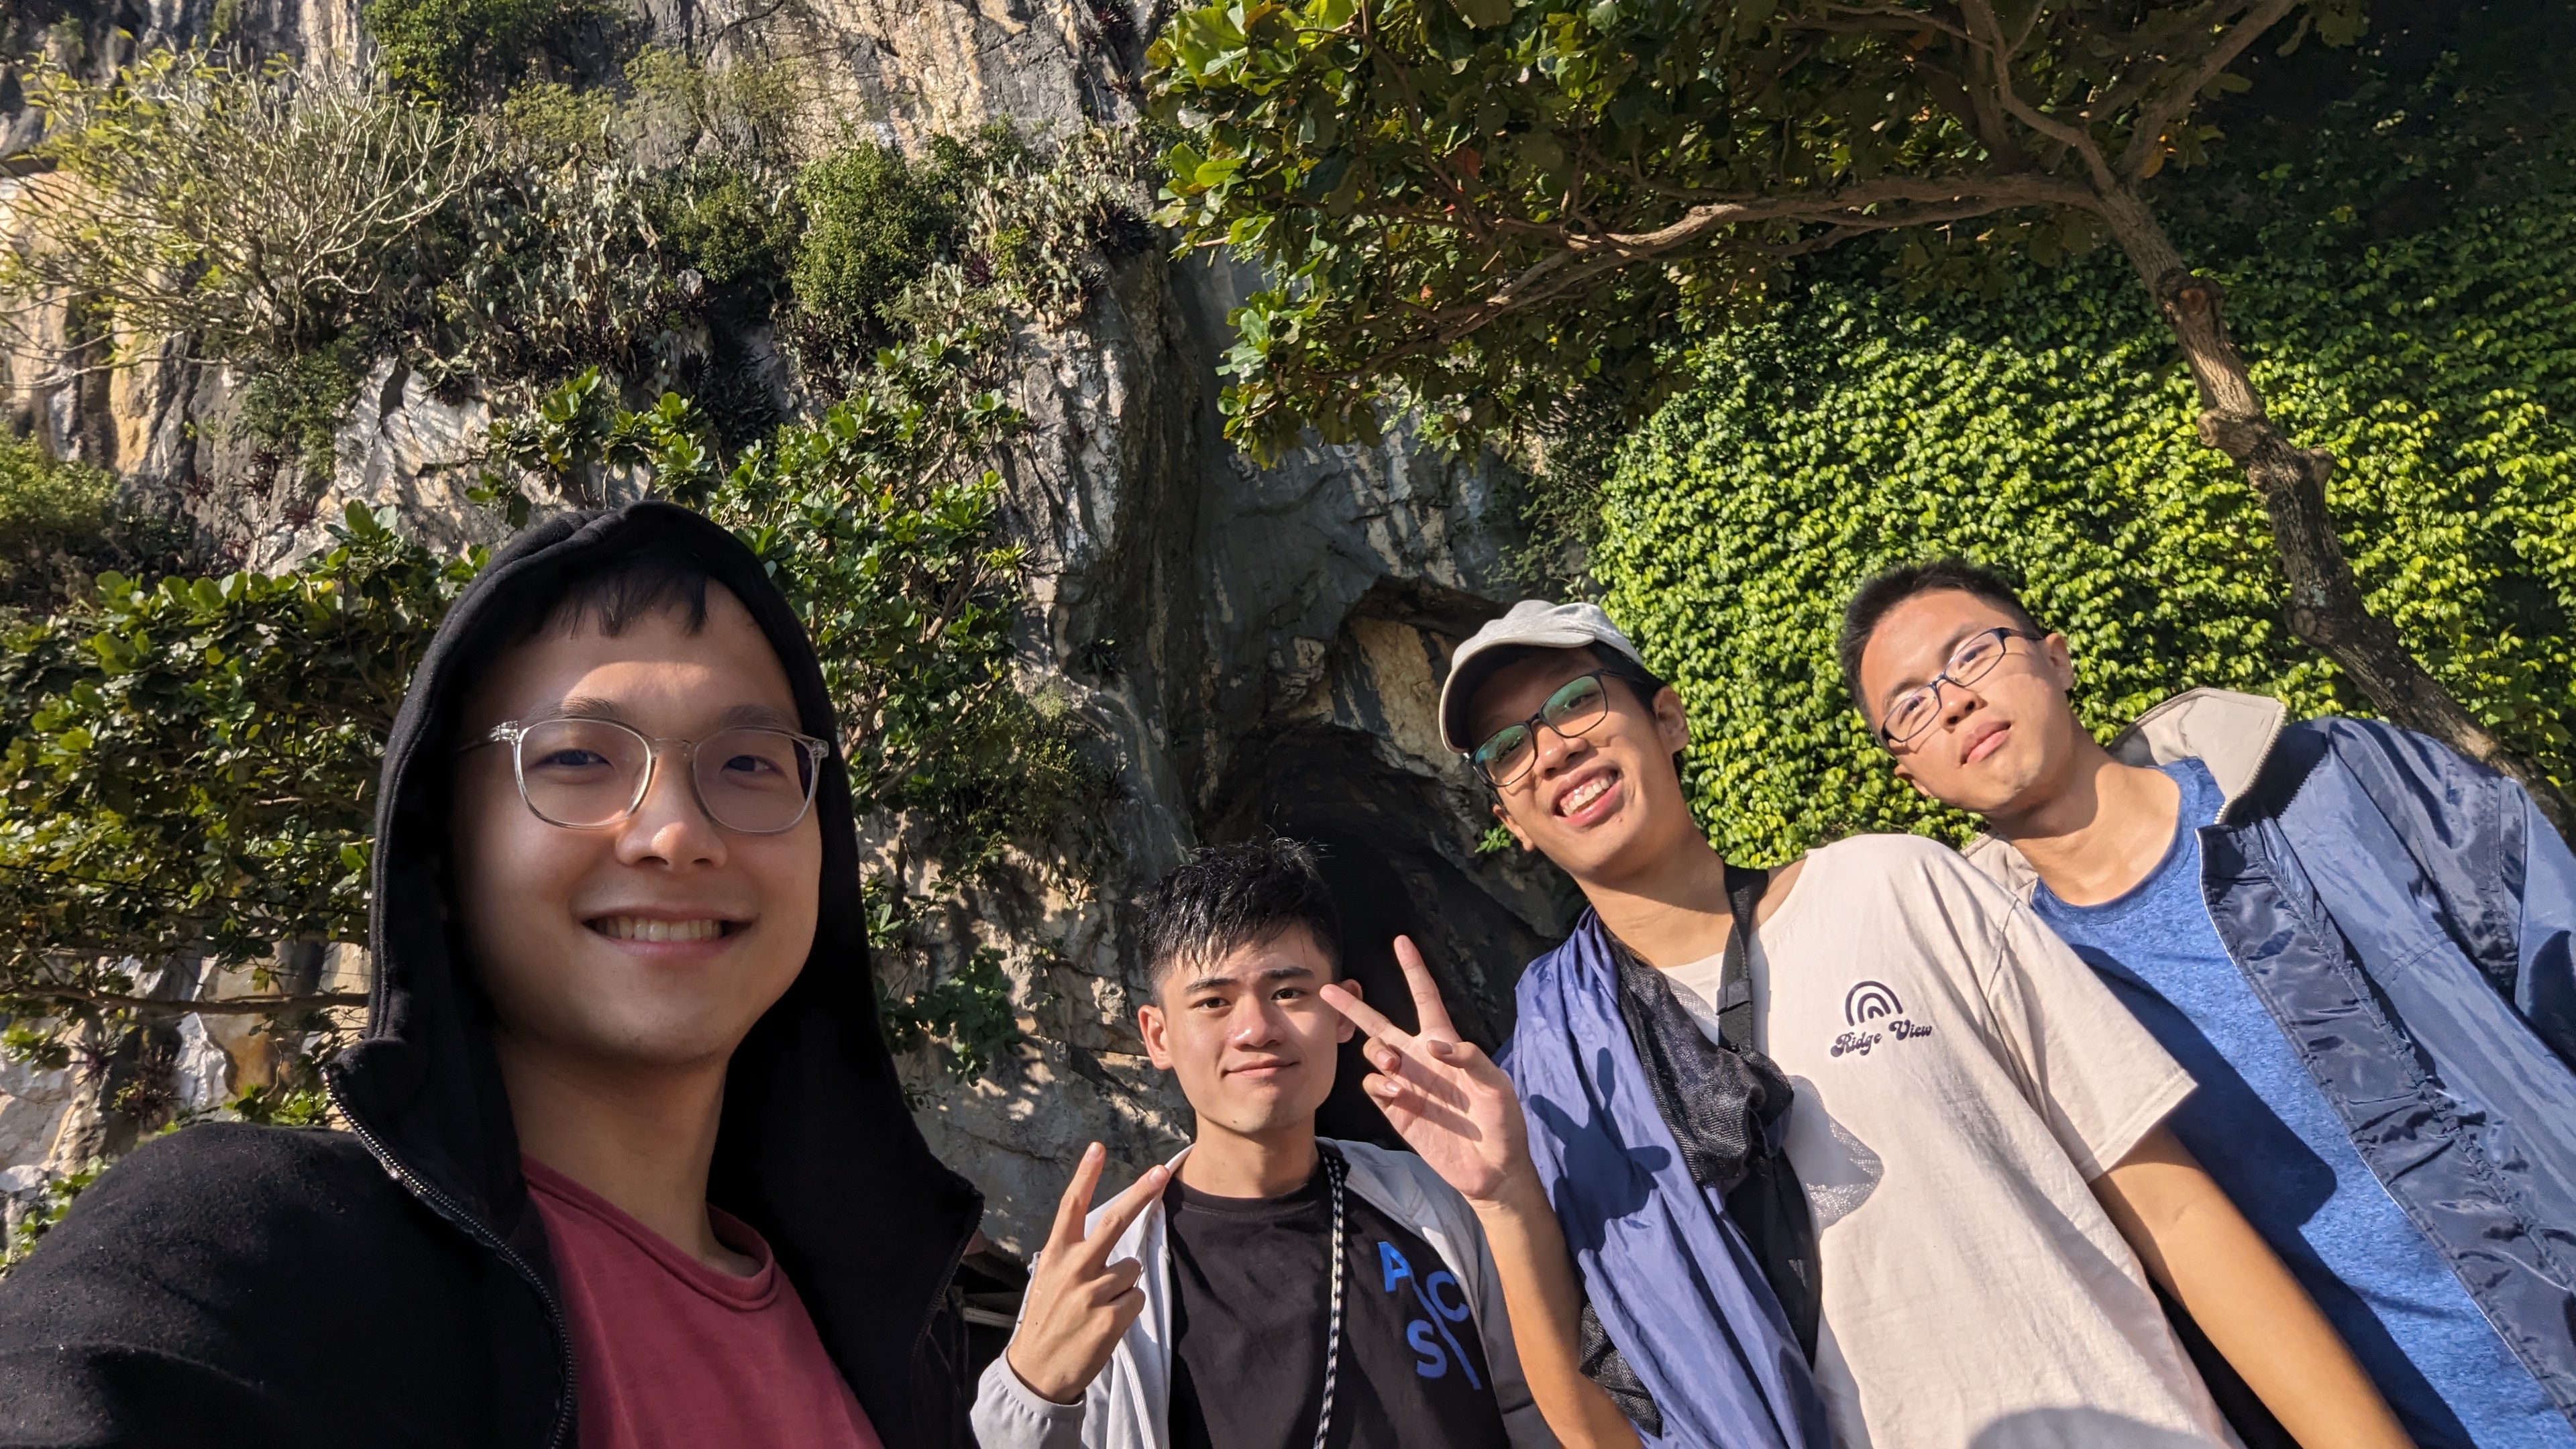 Group picture in front of the cave entrance